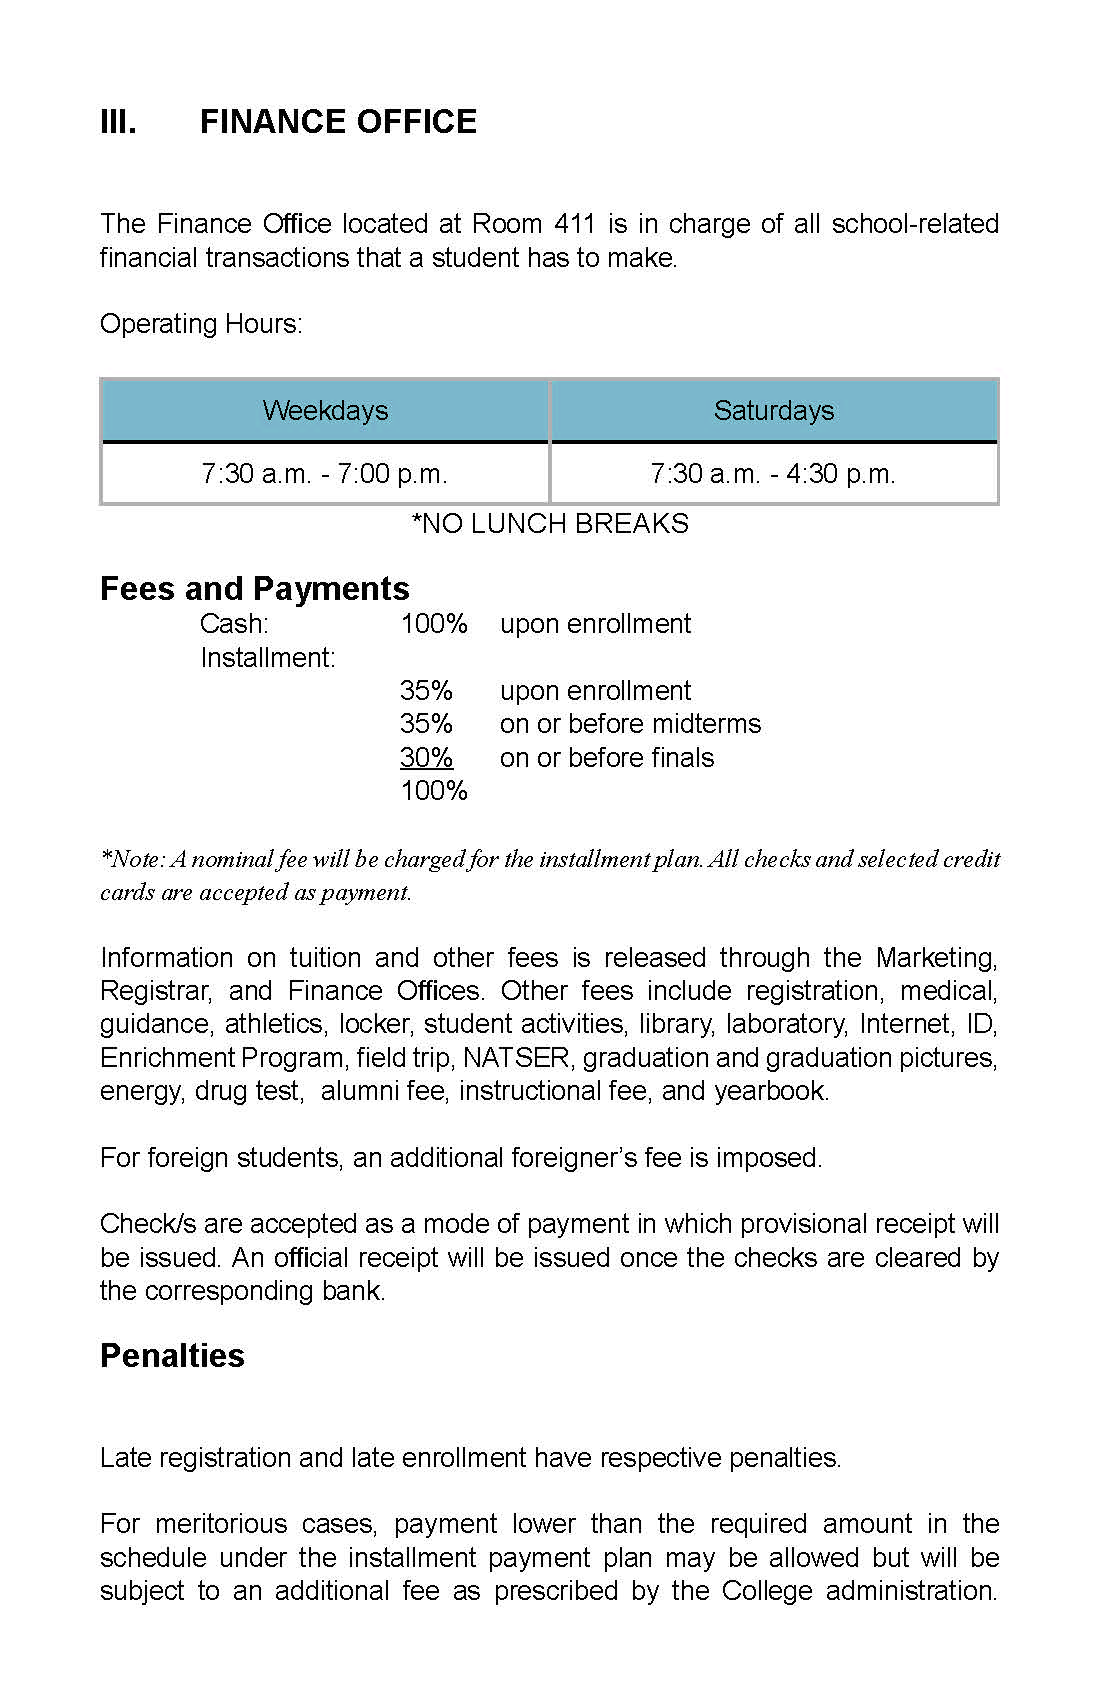 Finance Office Playbook_Page_1